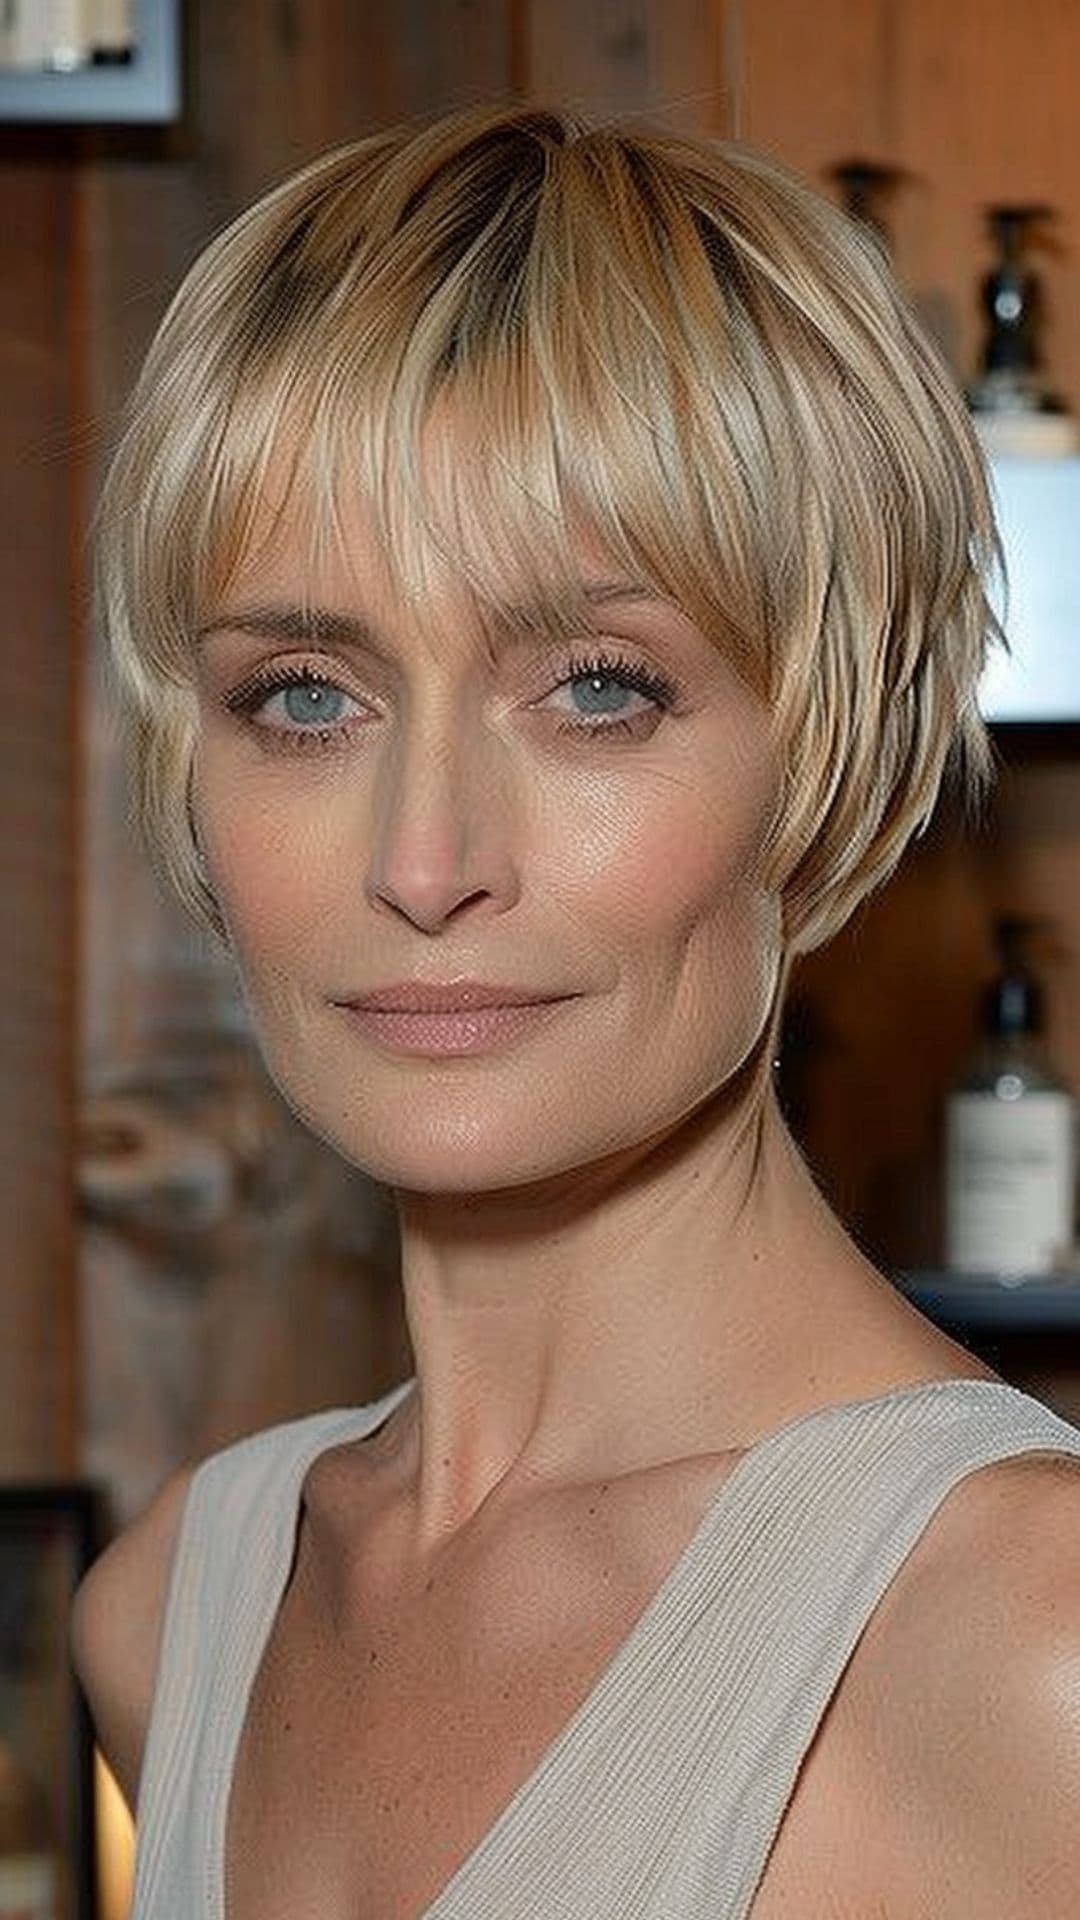 An older woman modelling blunt bangs with pixie cut.